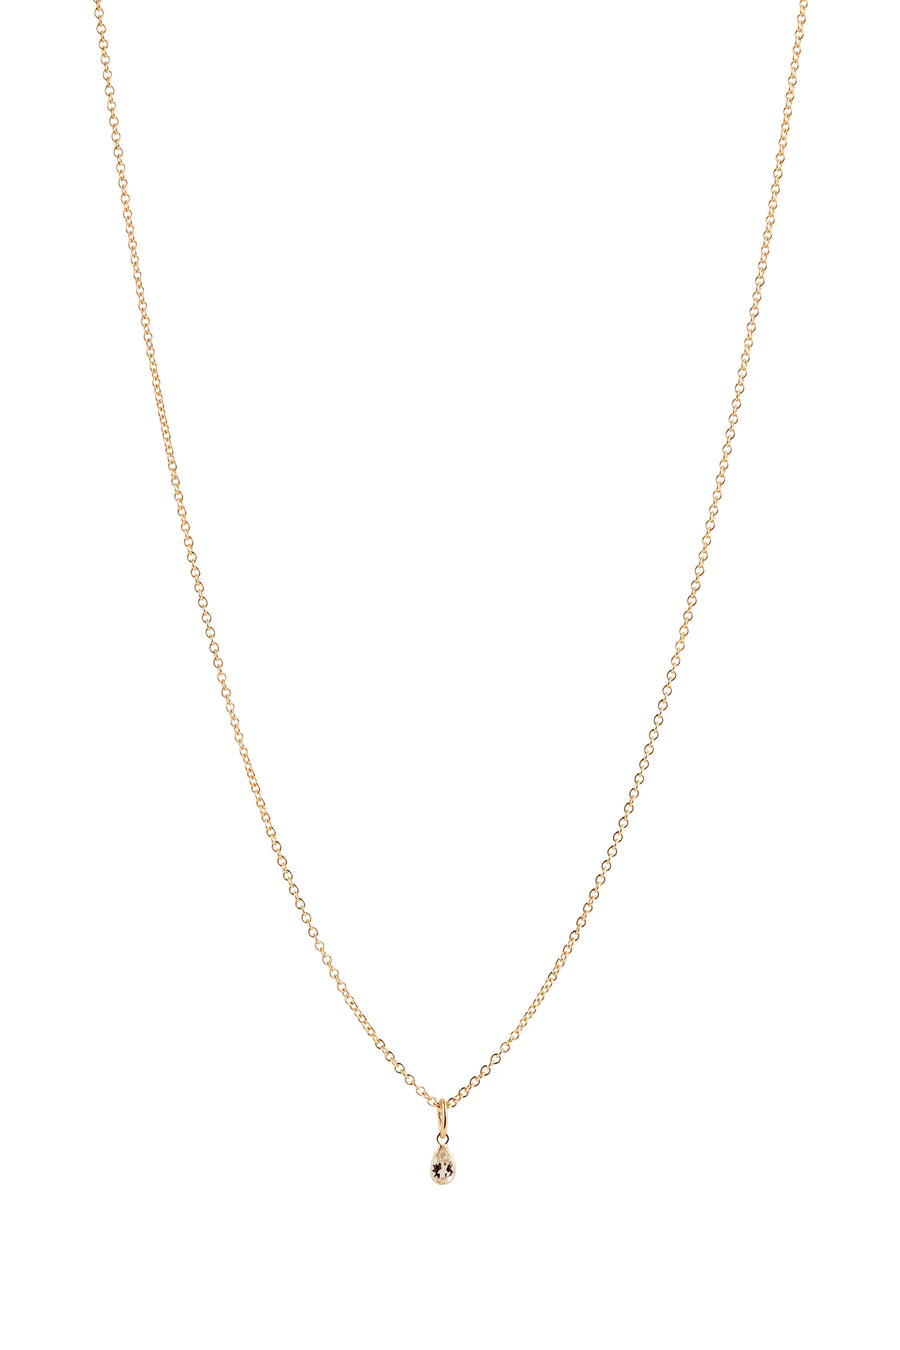 LISBETH JEWELRY - BASEL NECKLACE - GOLD FILLED